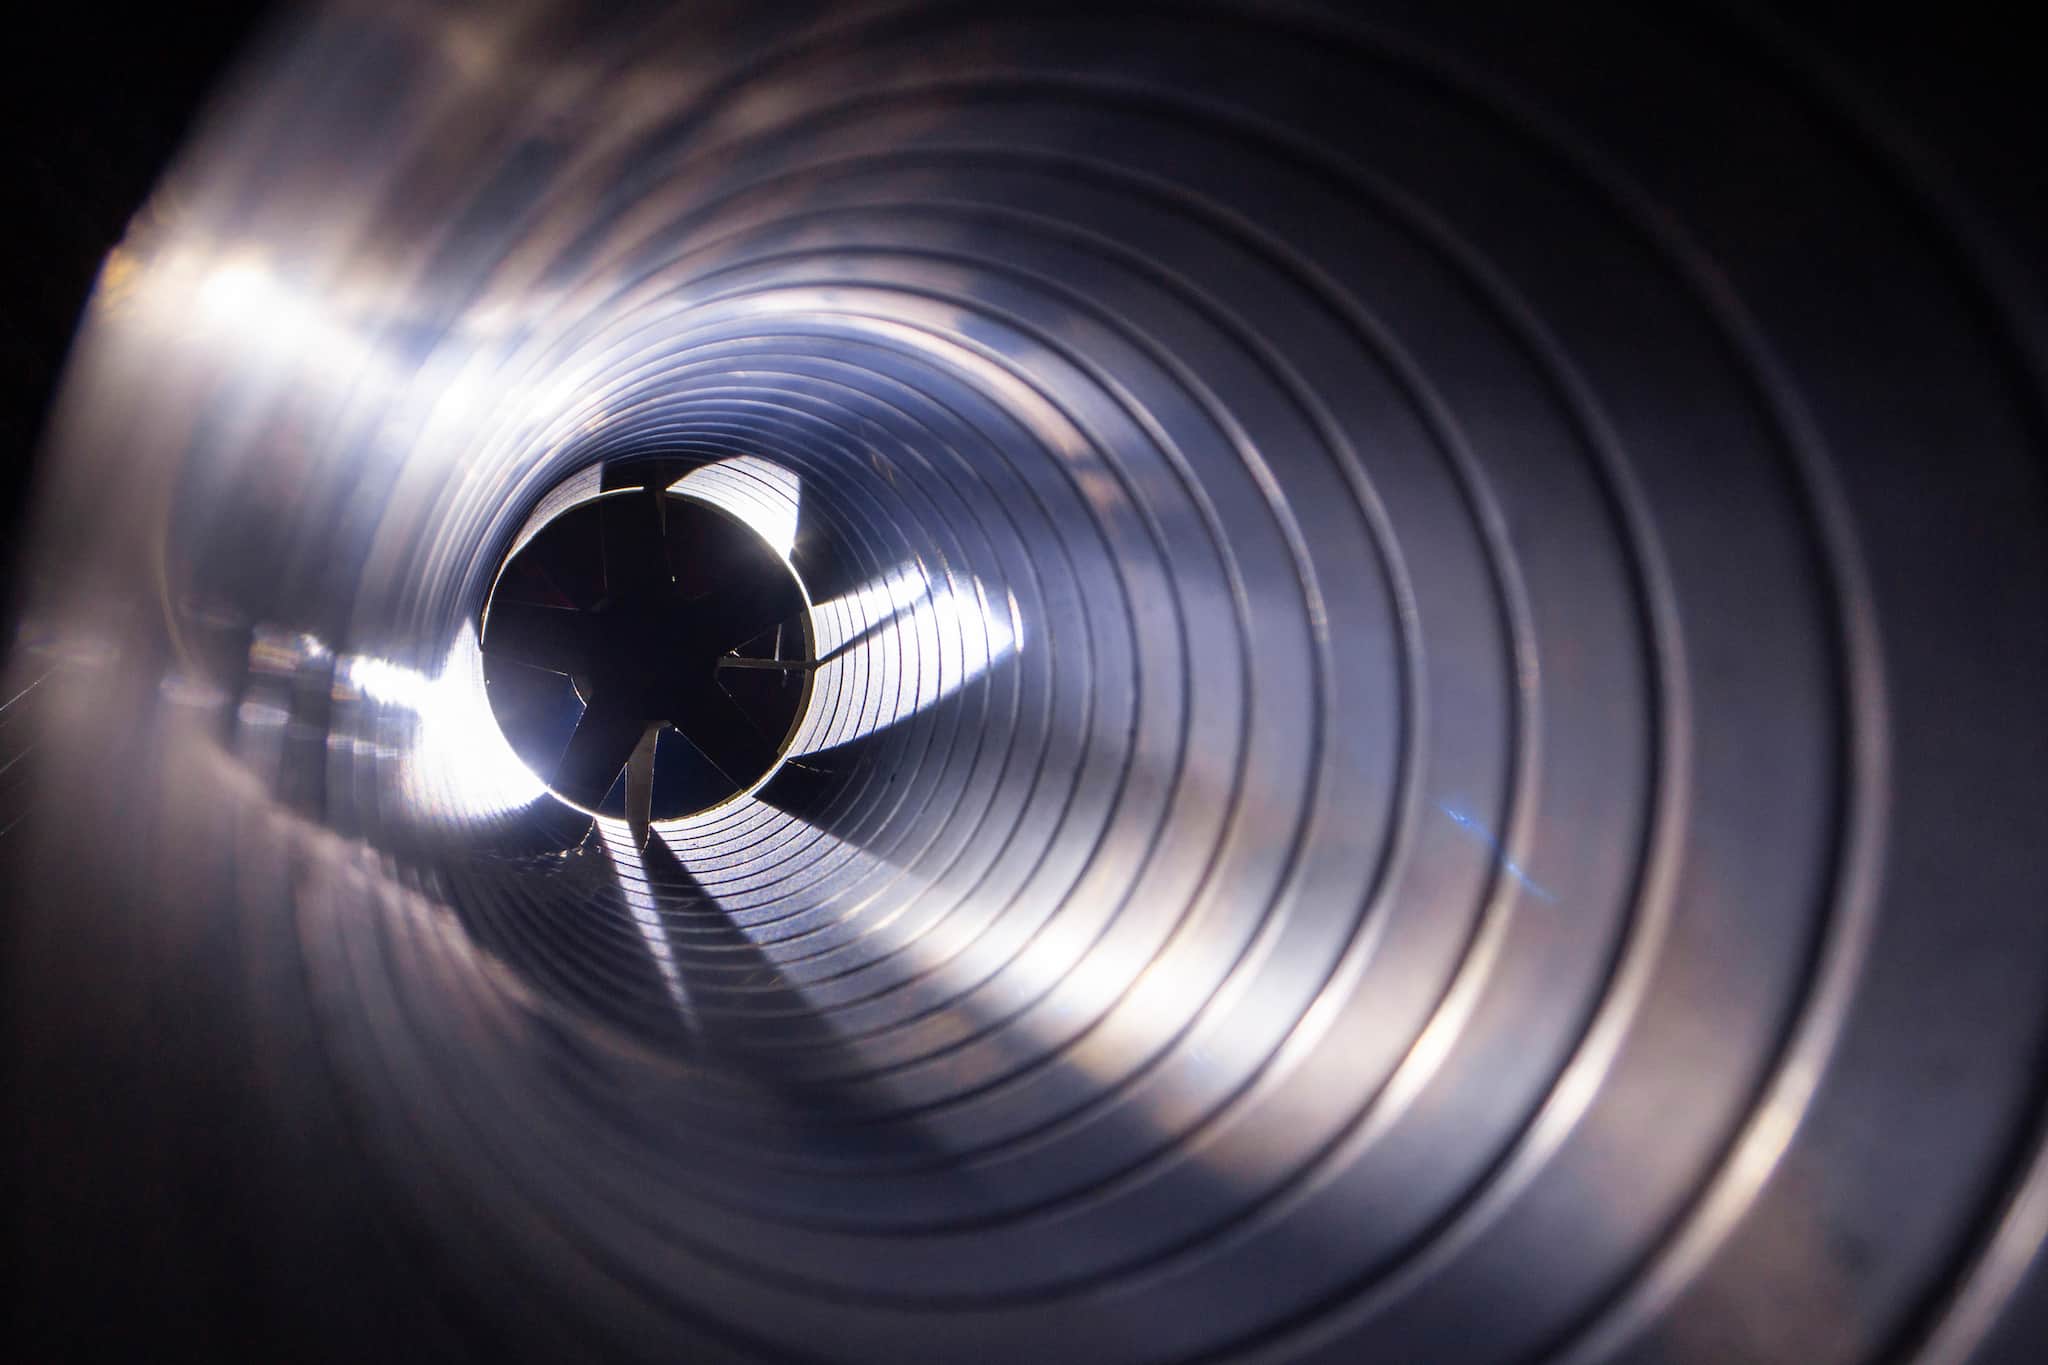 Photo of the inside of a metal cylindrical air duct.